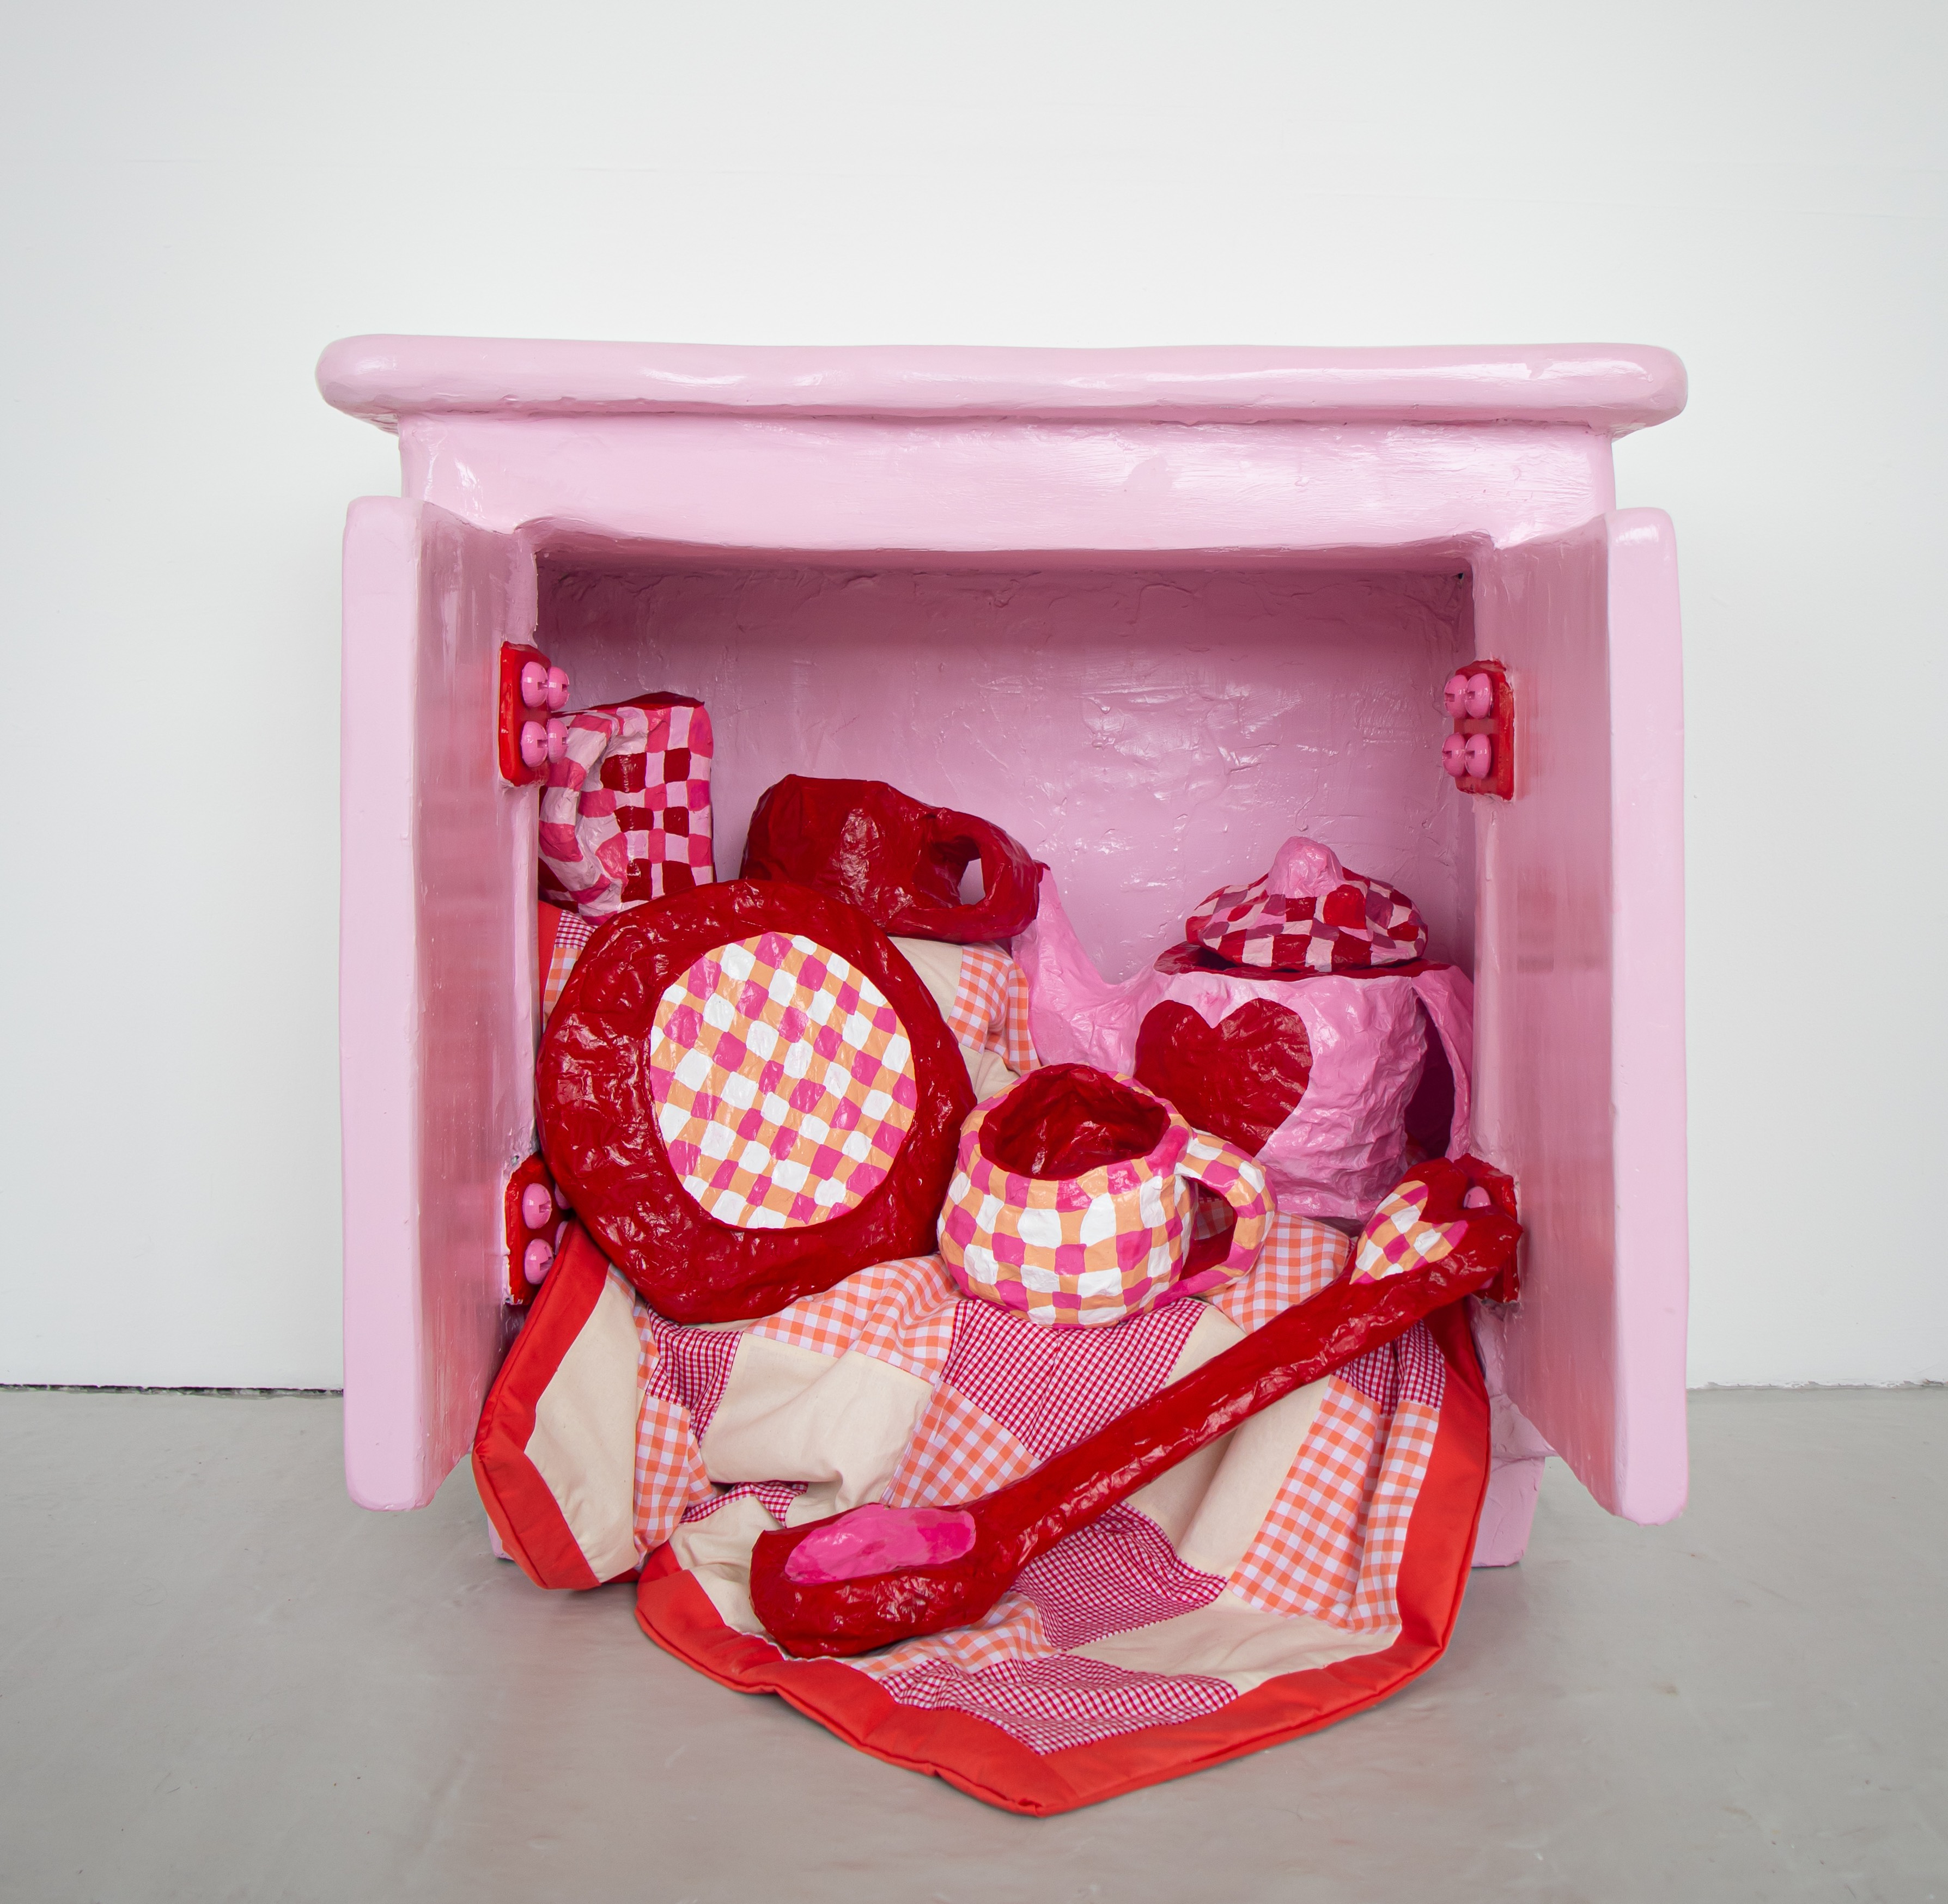 Fine Art work by Georgia Keeling showing sculptures of a picnic set within a cabinet